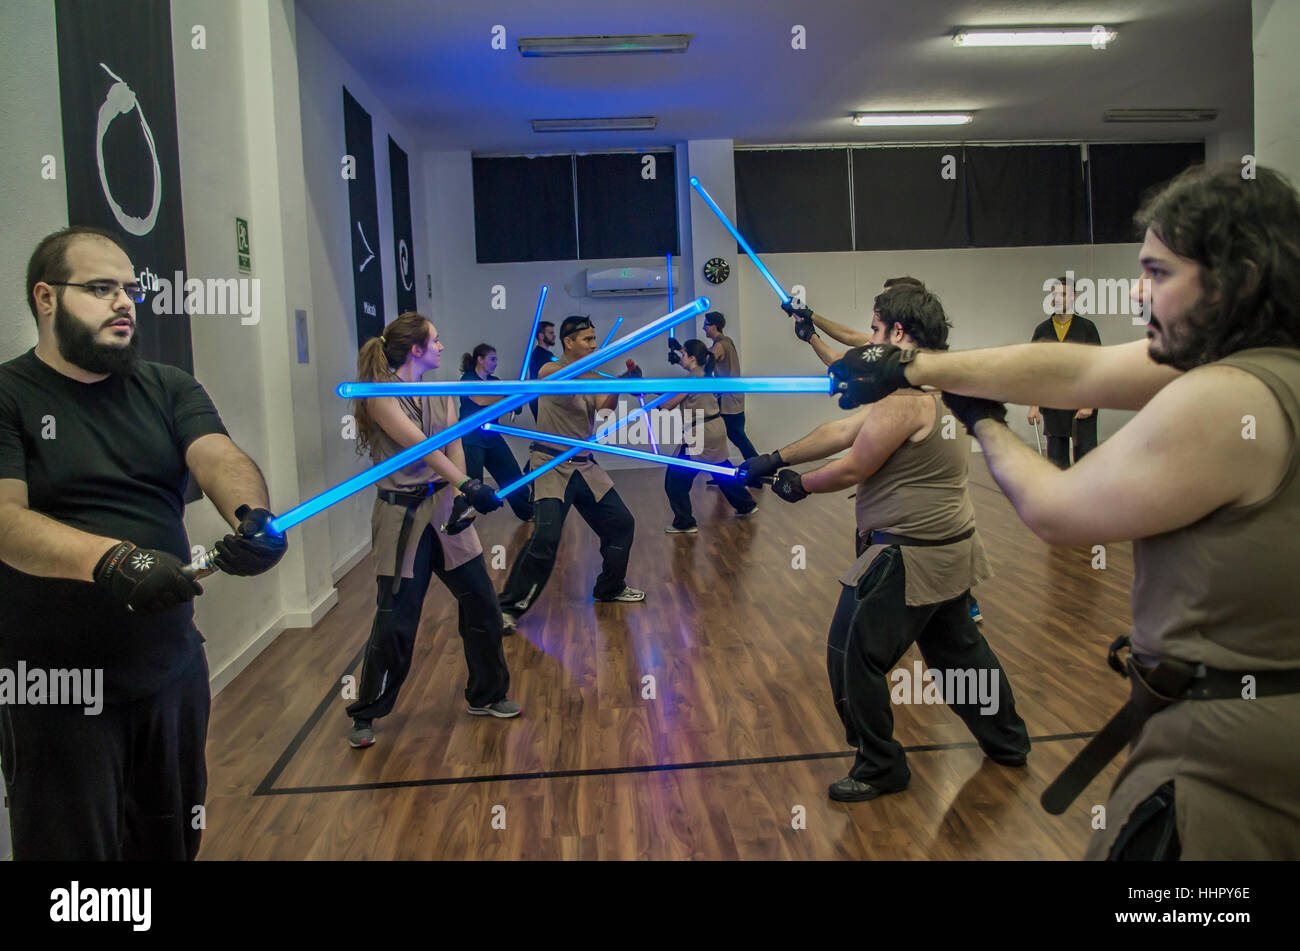 Madrid, Spain. 19th January, 2017. A lightsaber class based on the 'Star Wars' movie franchise takes place in Madrid at LugoSport, a school which has been developing this sport in Spain since last year. Credit: Lora Grigorova/Alamy Live News Stock Photo